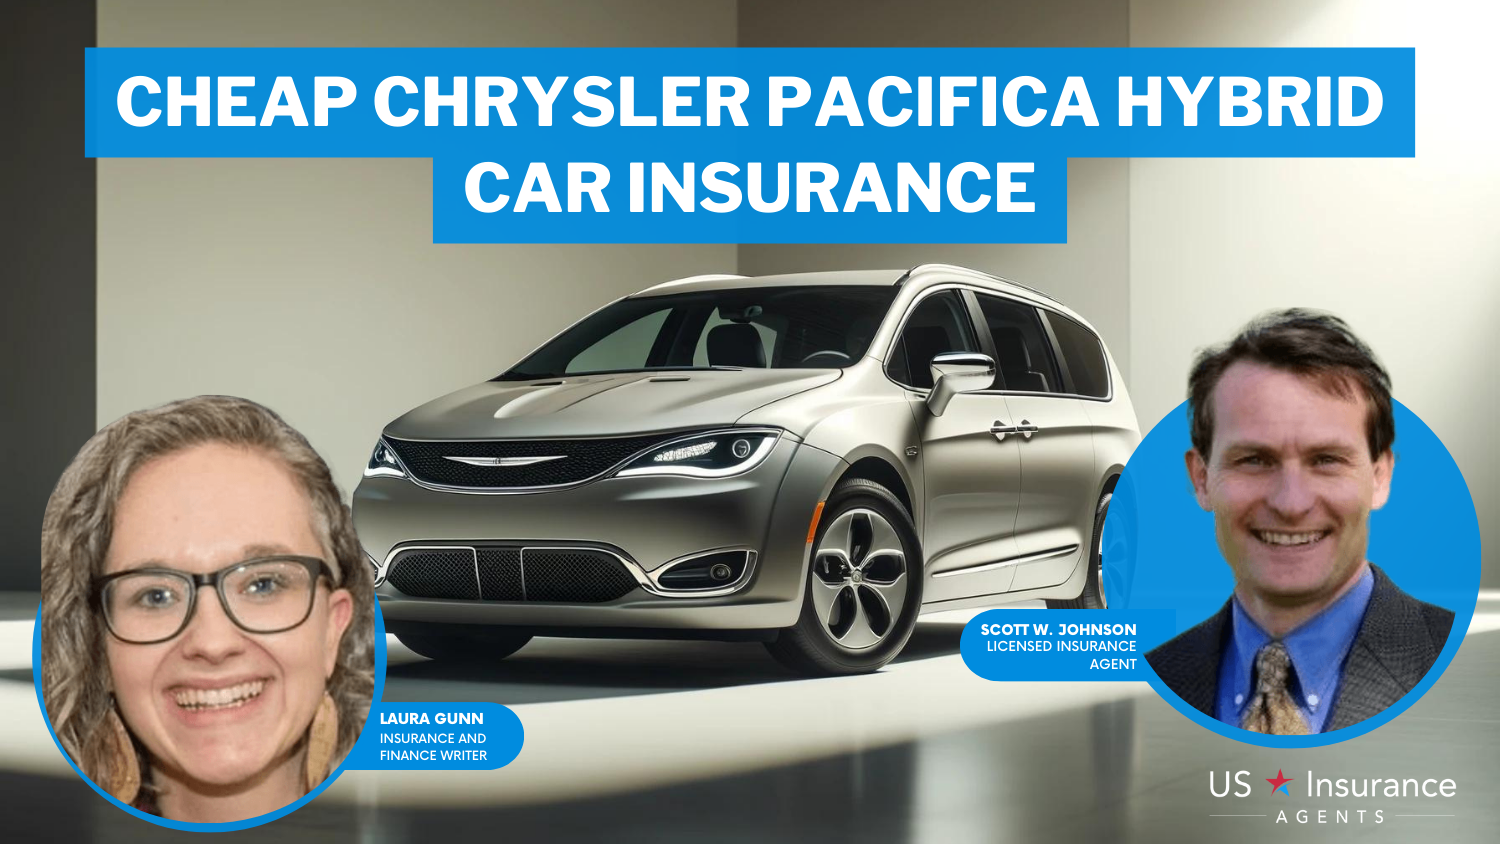 Cheap Chrysler Pacifica Hybrid Car Insurance: State Farm, Travelers, and Erie